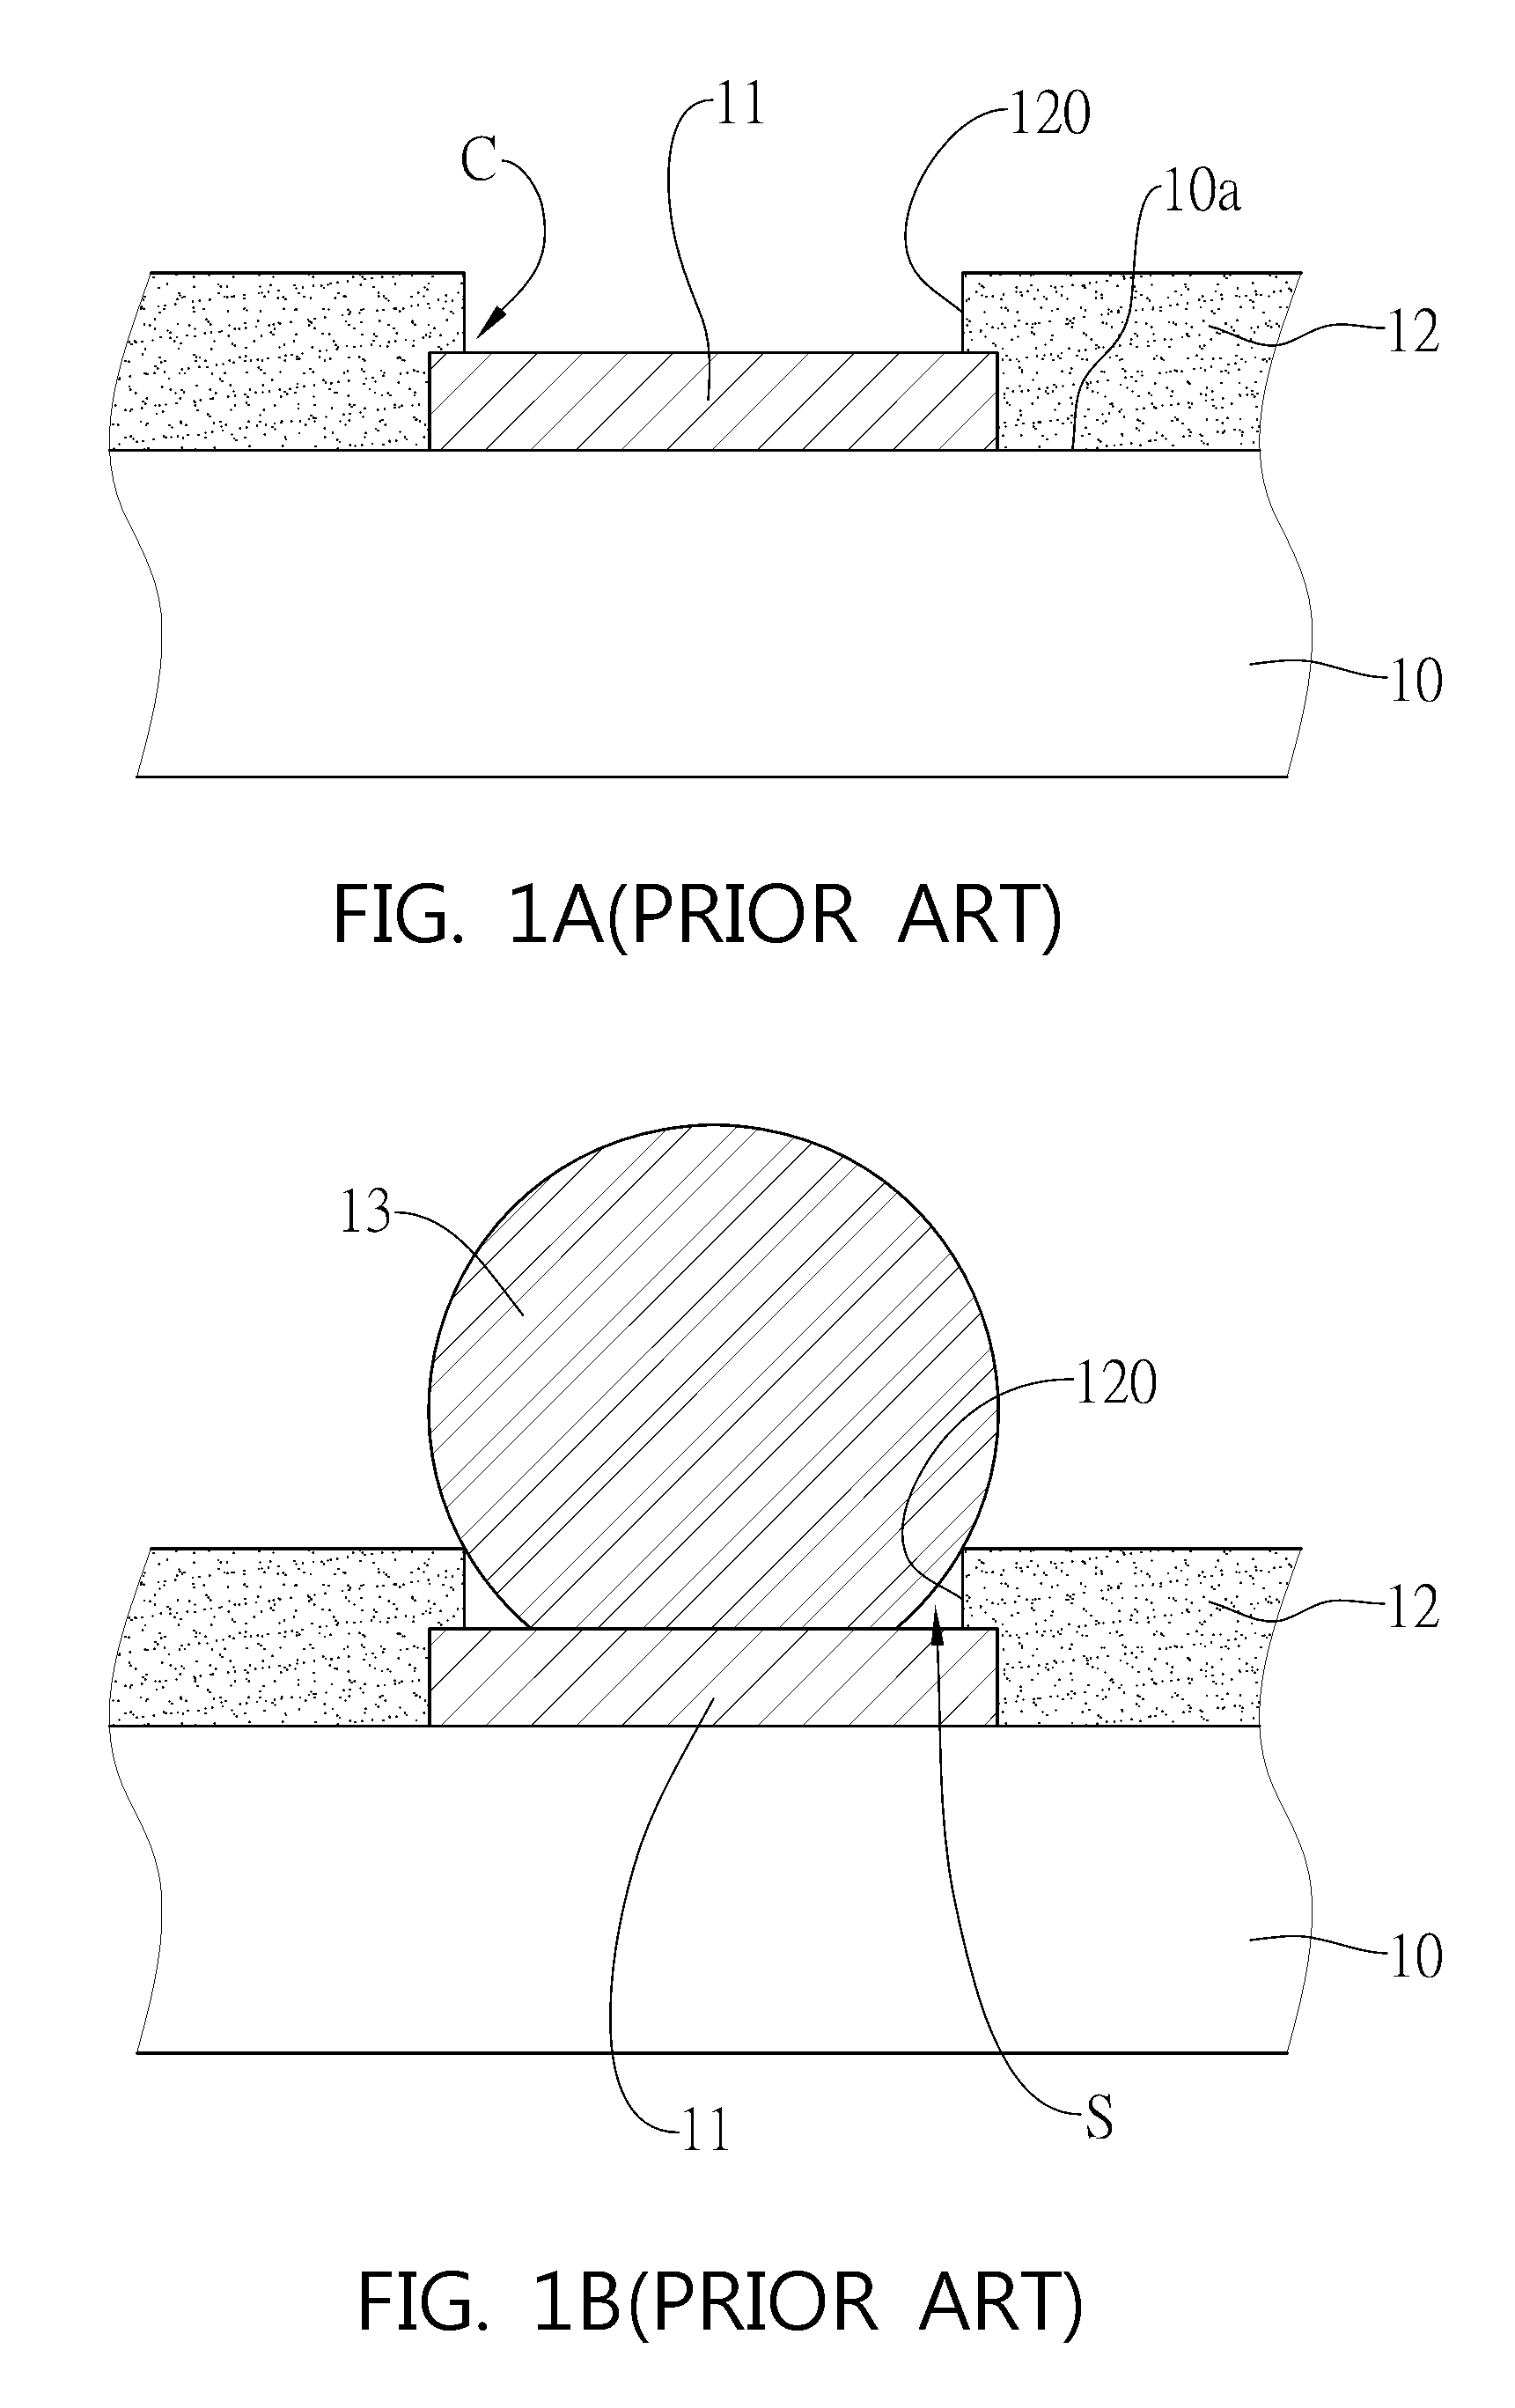 Package substrate having electrically connecting structure